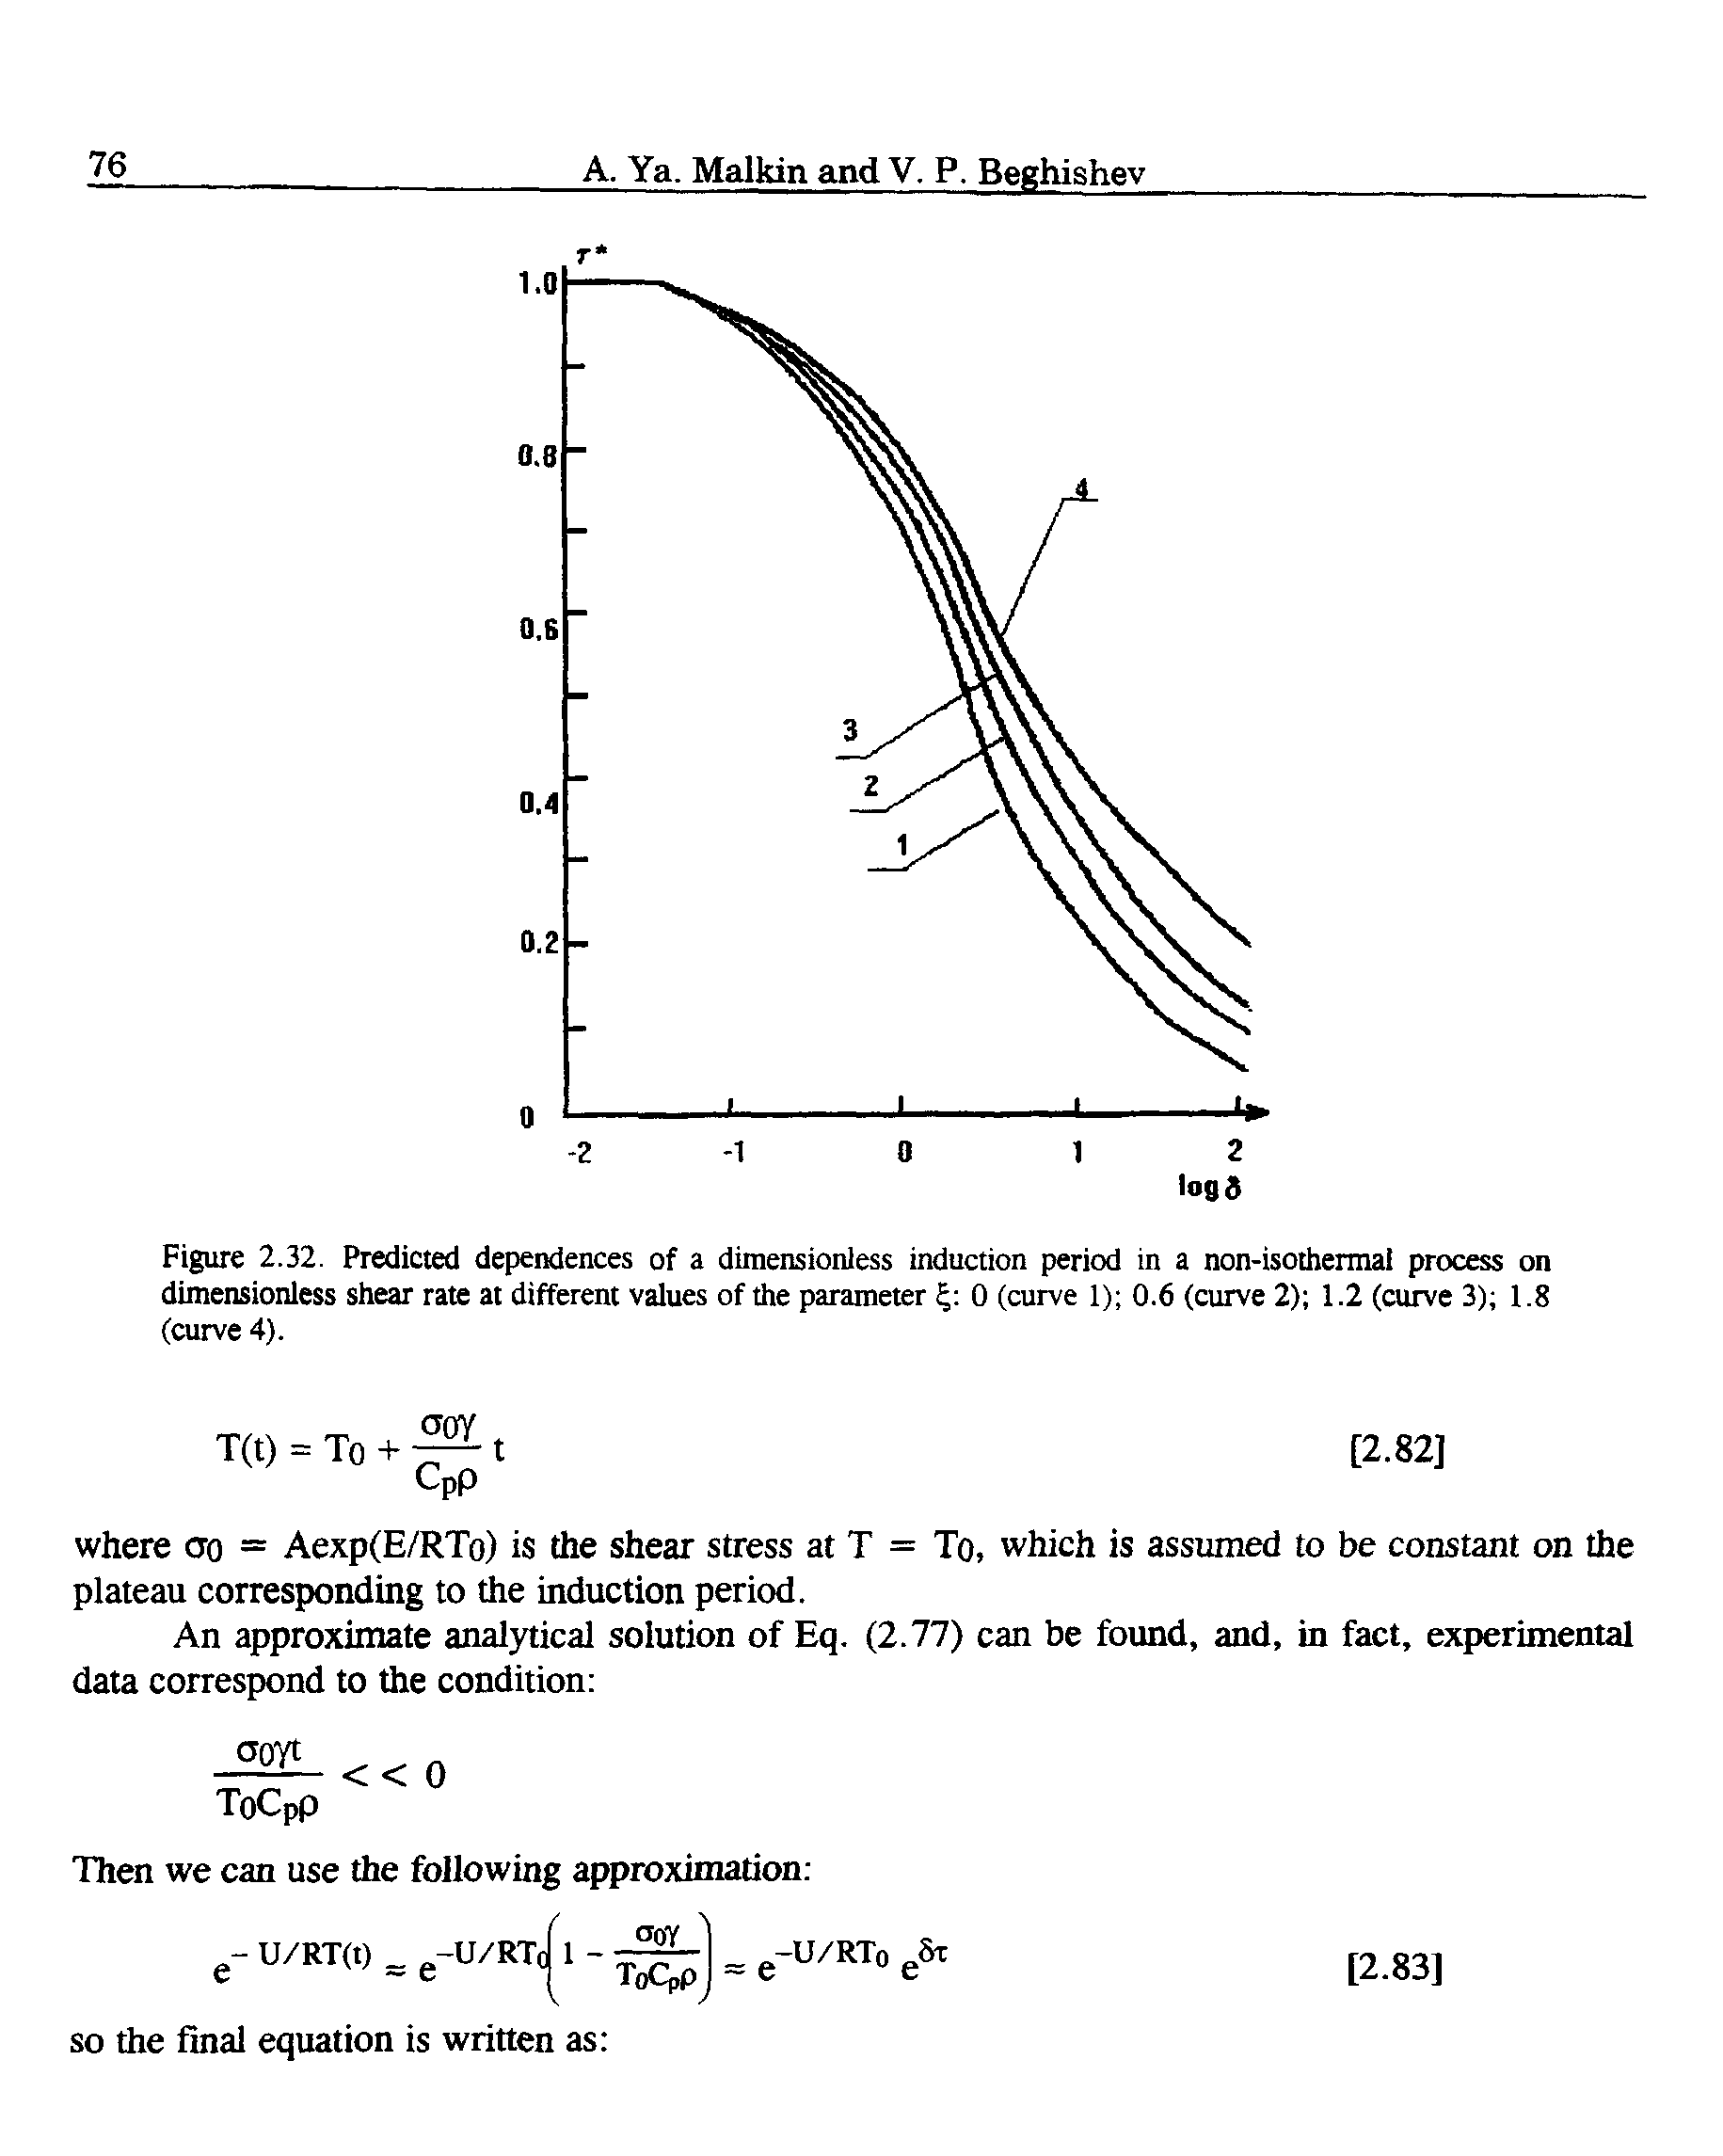 Figure 2.32. Predicted dependences of a dimensionless induction period in a non-isothermal process on dimensionless shear rate at different values of the parameter i 0 (curve 1) 0.6 (curve 2) 1.2 (curve 3) 1.8 (curve 4).